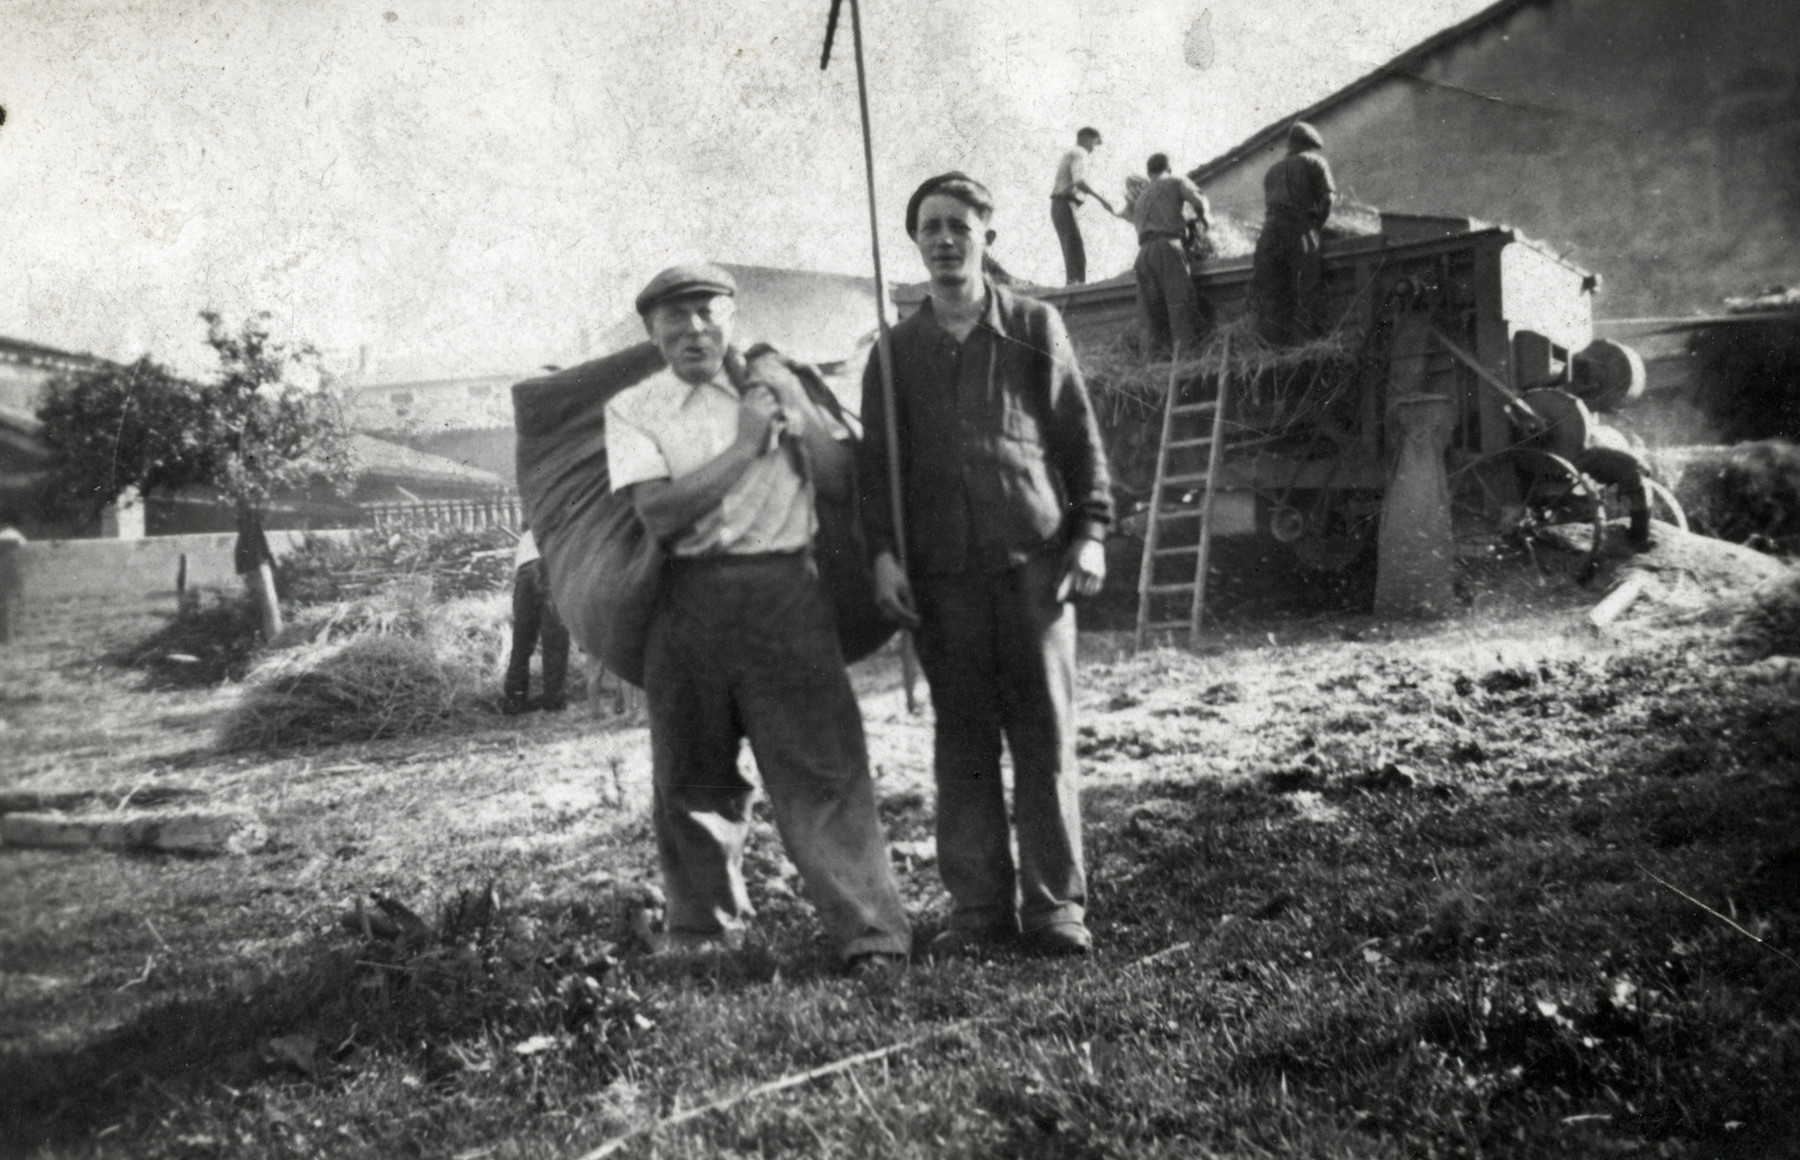 A Jewish man living under false papers in Vichy France, and the farmer who provided him with work and protection during the war.

Pictured is Hersh Jakubovitch (right) and Monsieur Guyot.